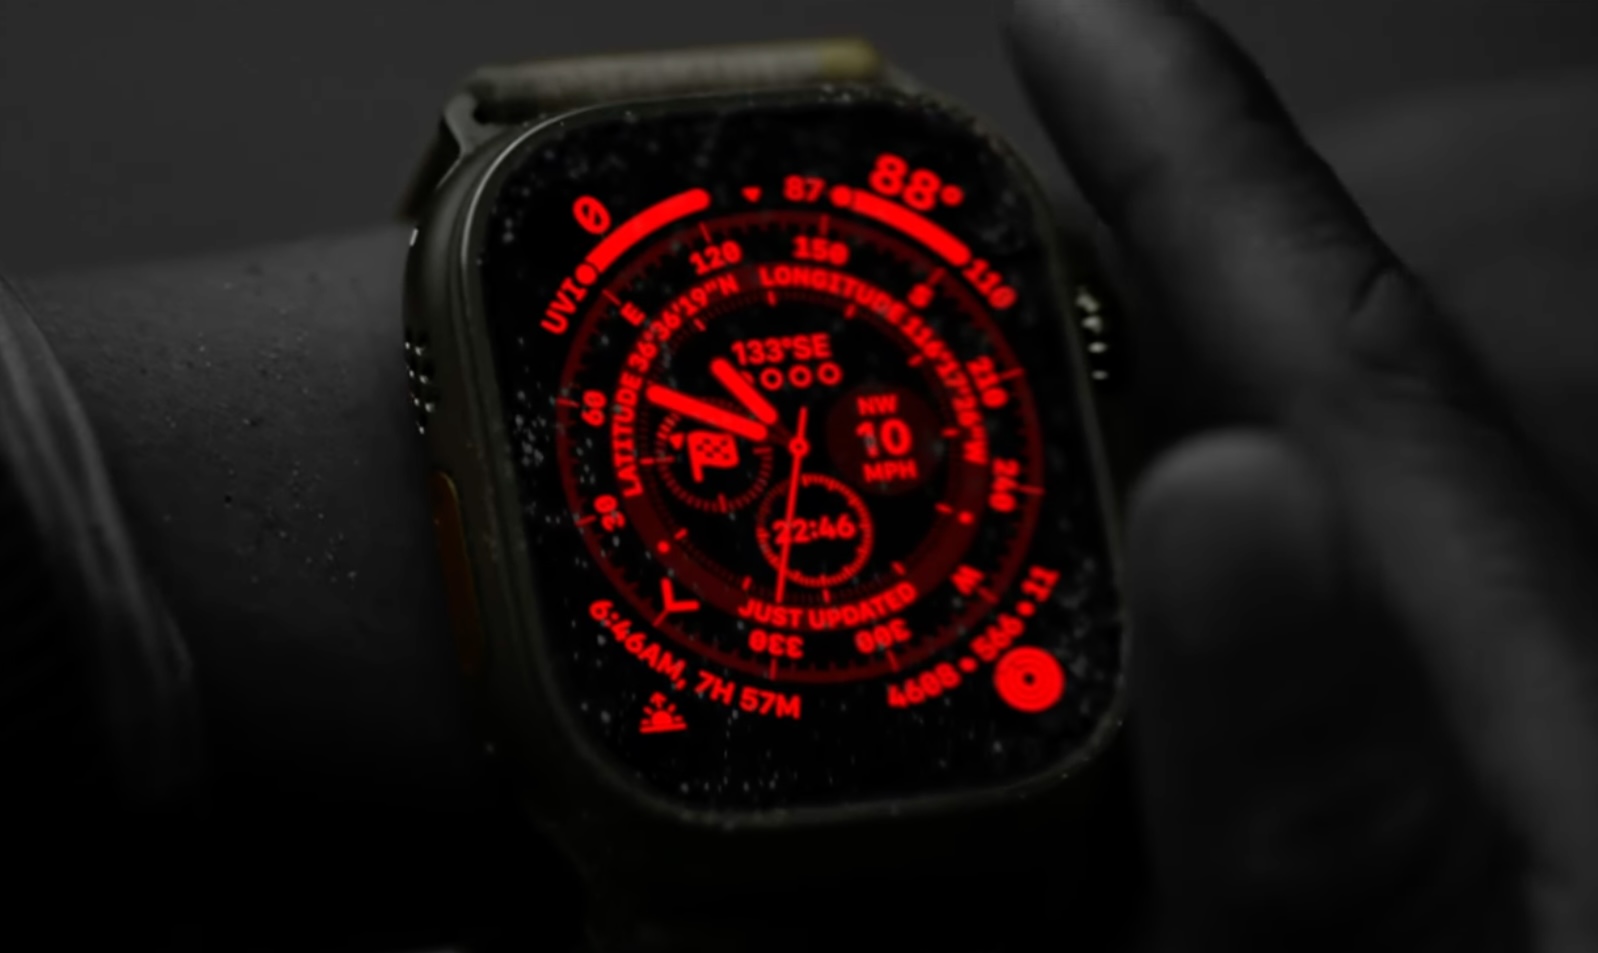 Apple Watch Ultra Display Too Dim in Low Light, Say Some Users